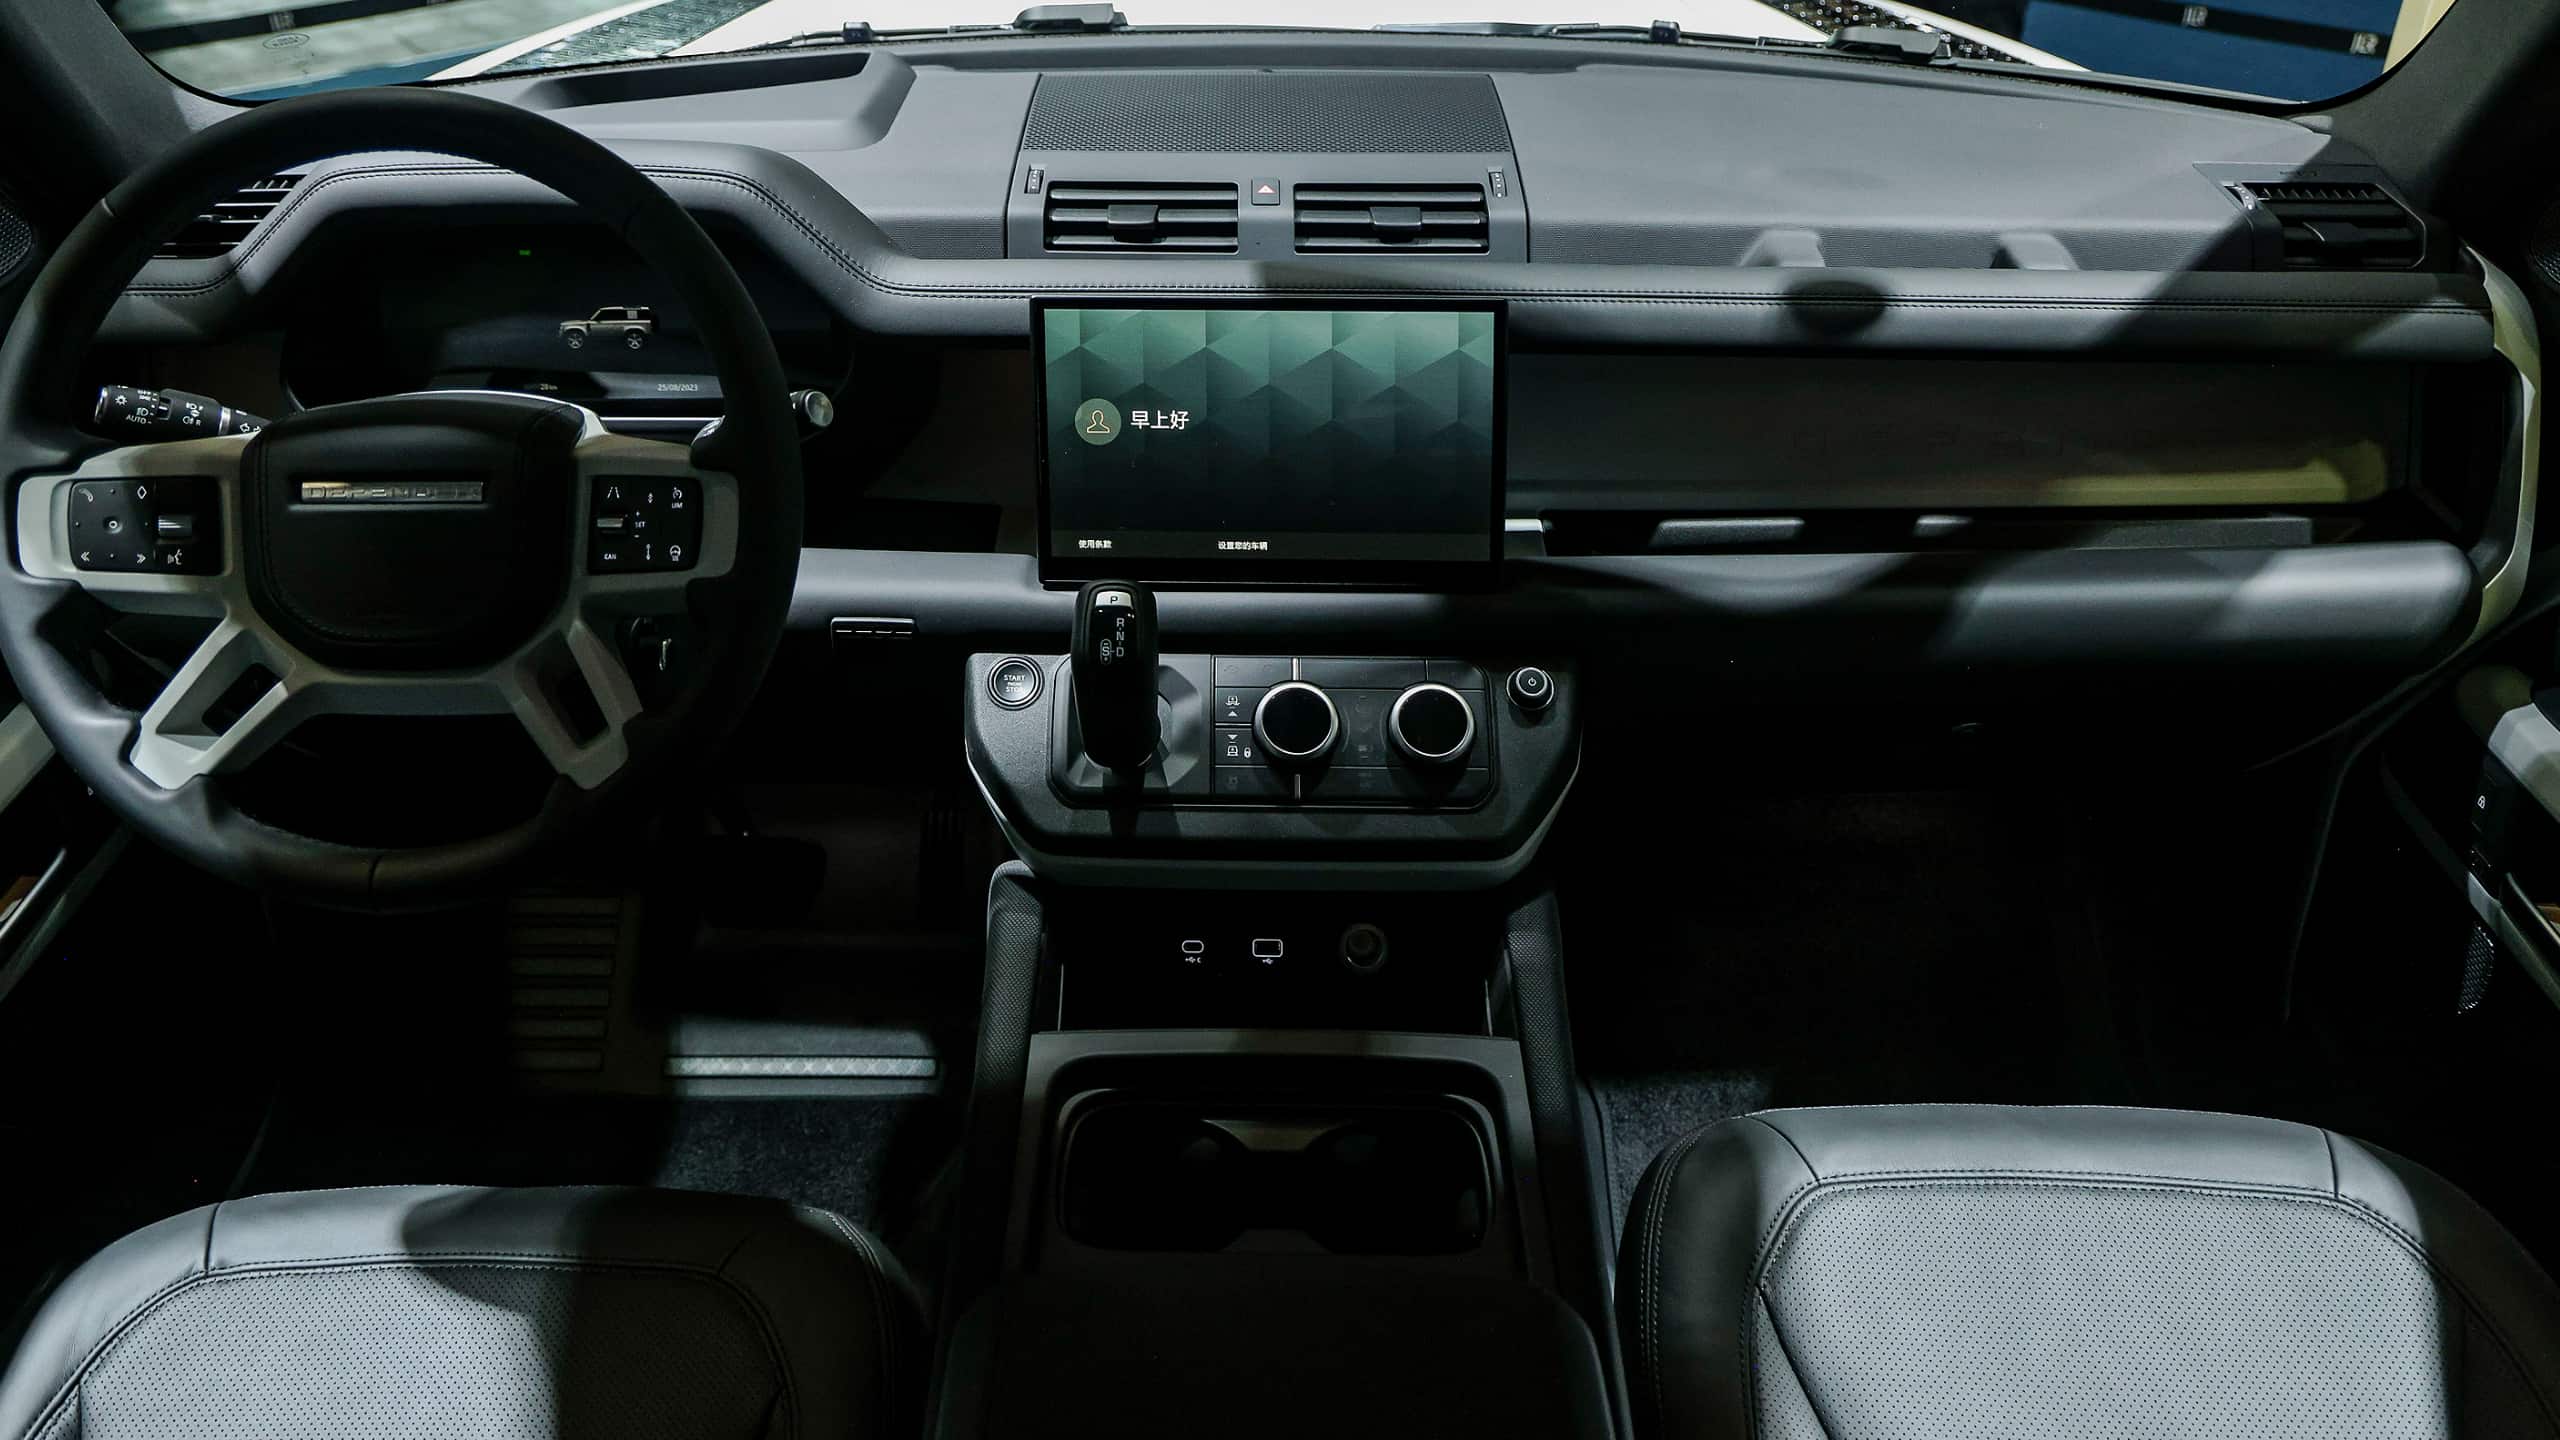 Land Rover Defender is equipped with the InControl OS 2.0 infotainment system